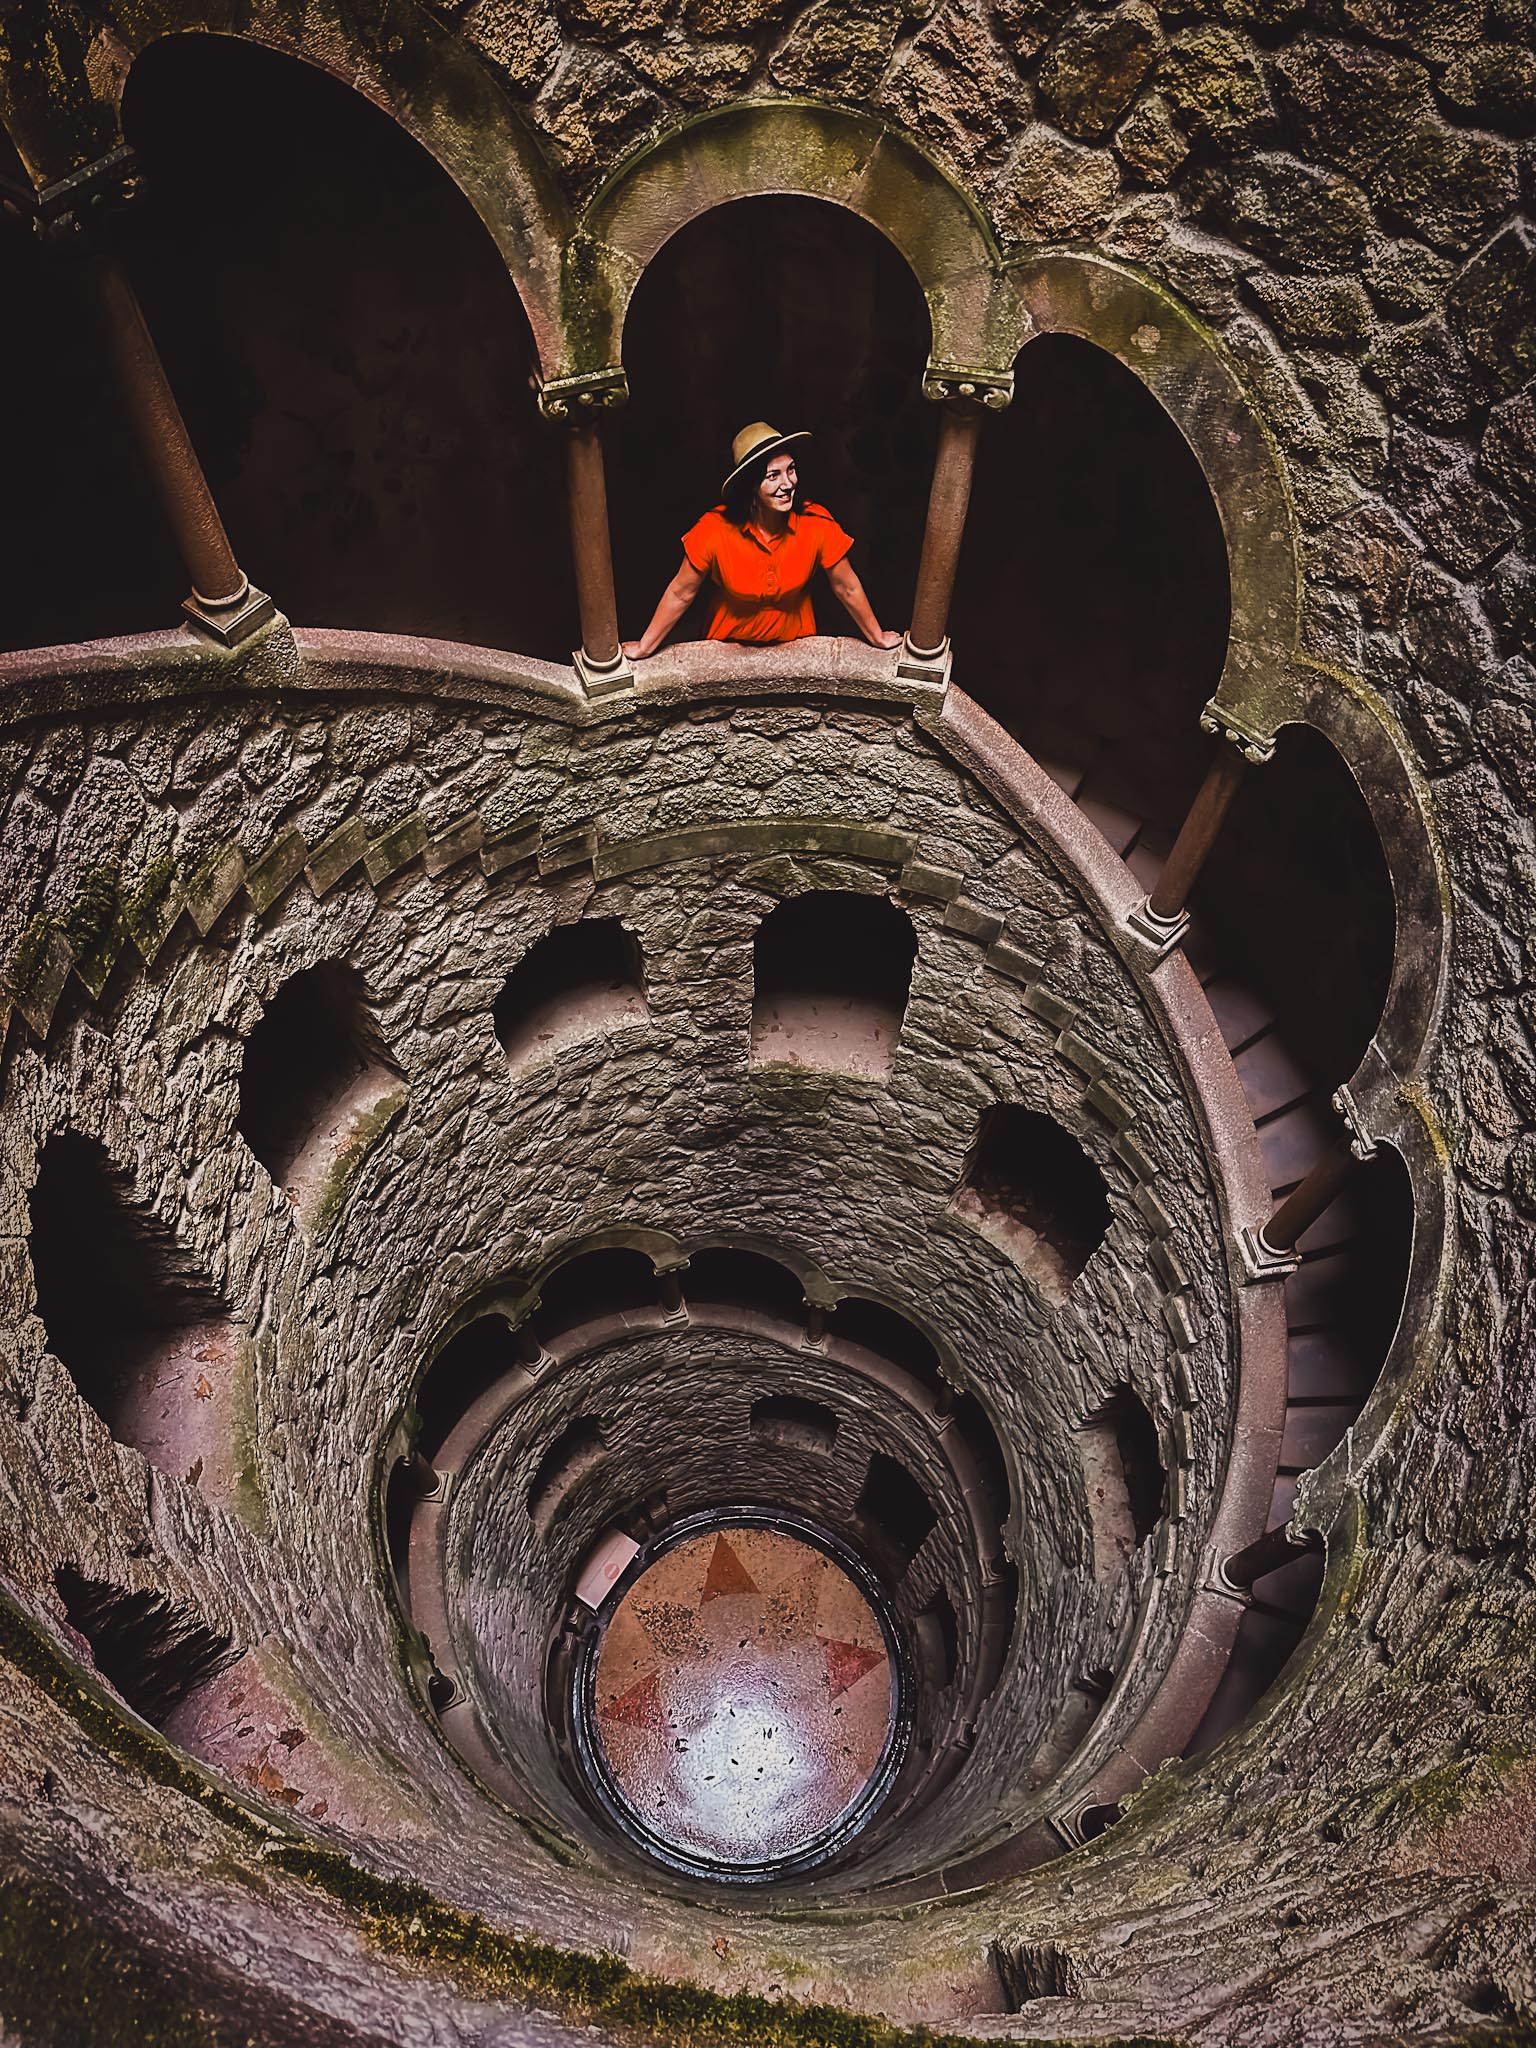 Top things to do in Sintra, Portugal - Initiation Well at Quinta da Regaleira